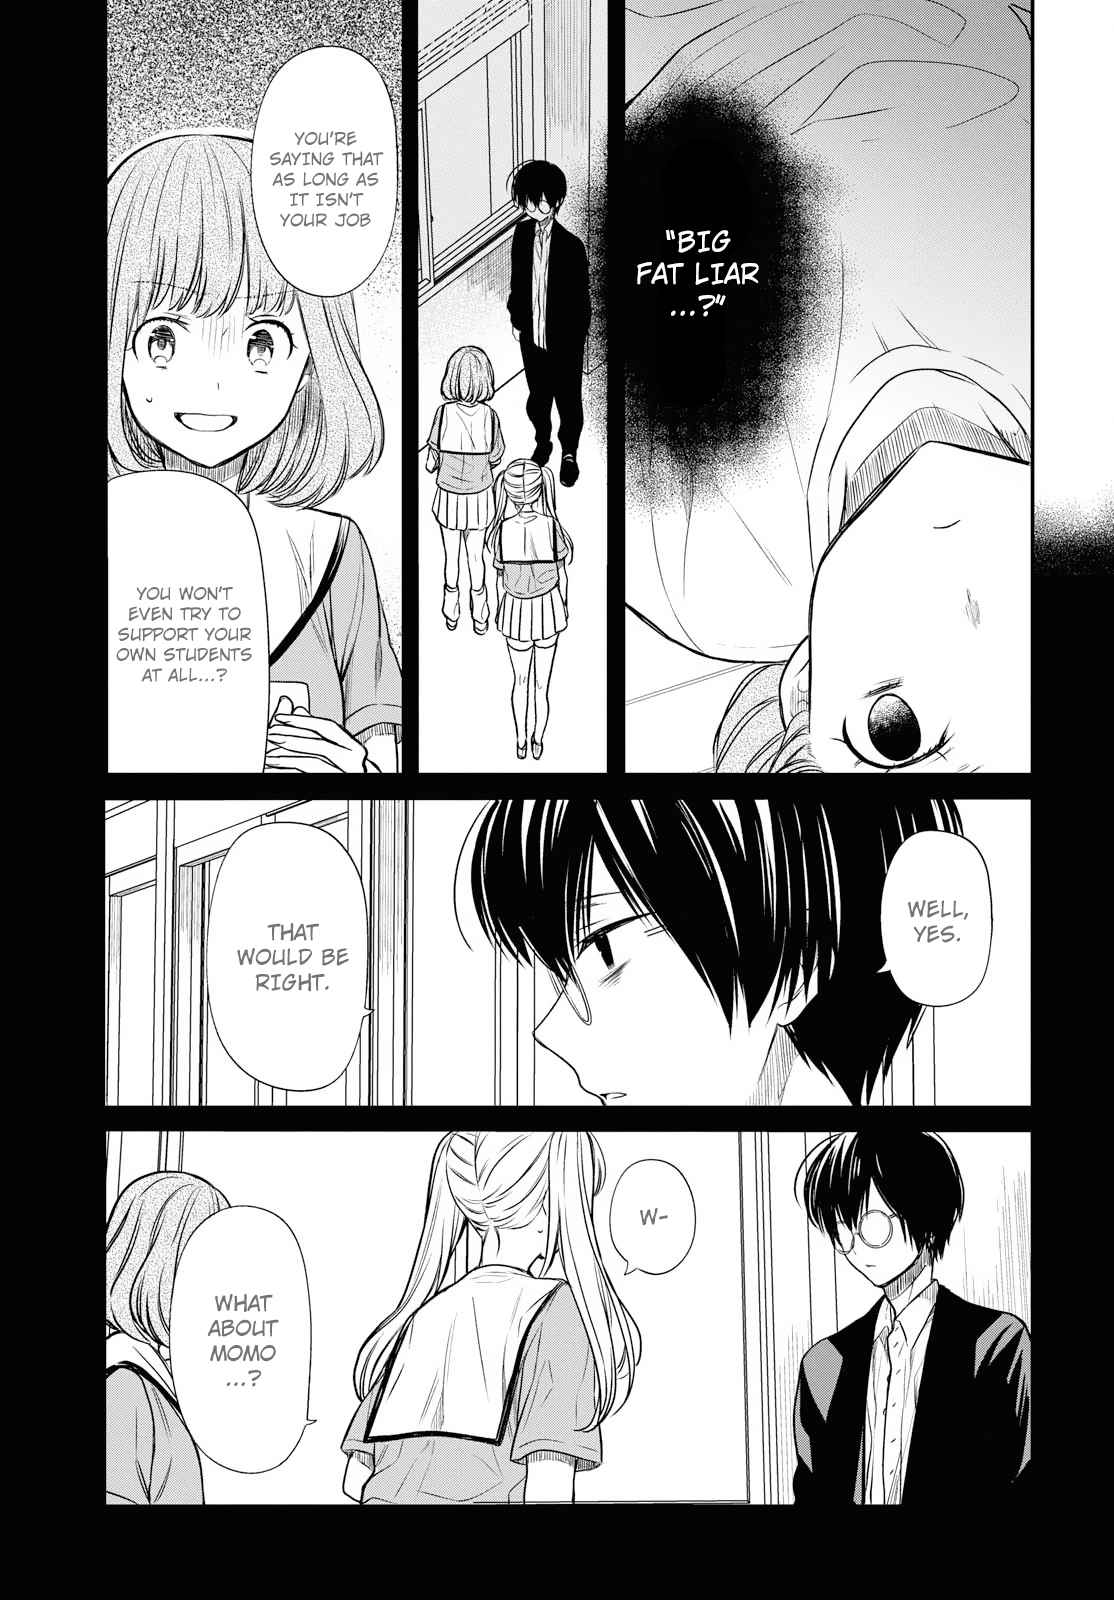 1 nen A gumi no Monster Ch. 12 Sensei, What Happened That Day?